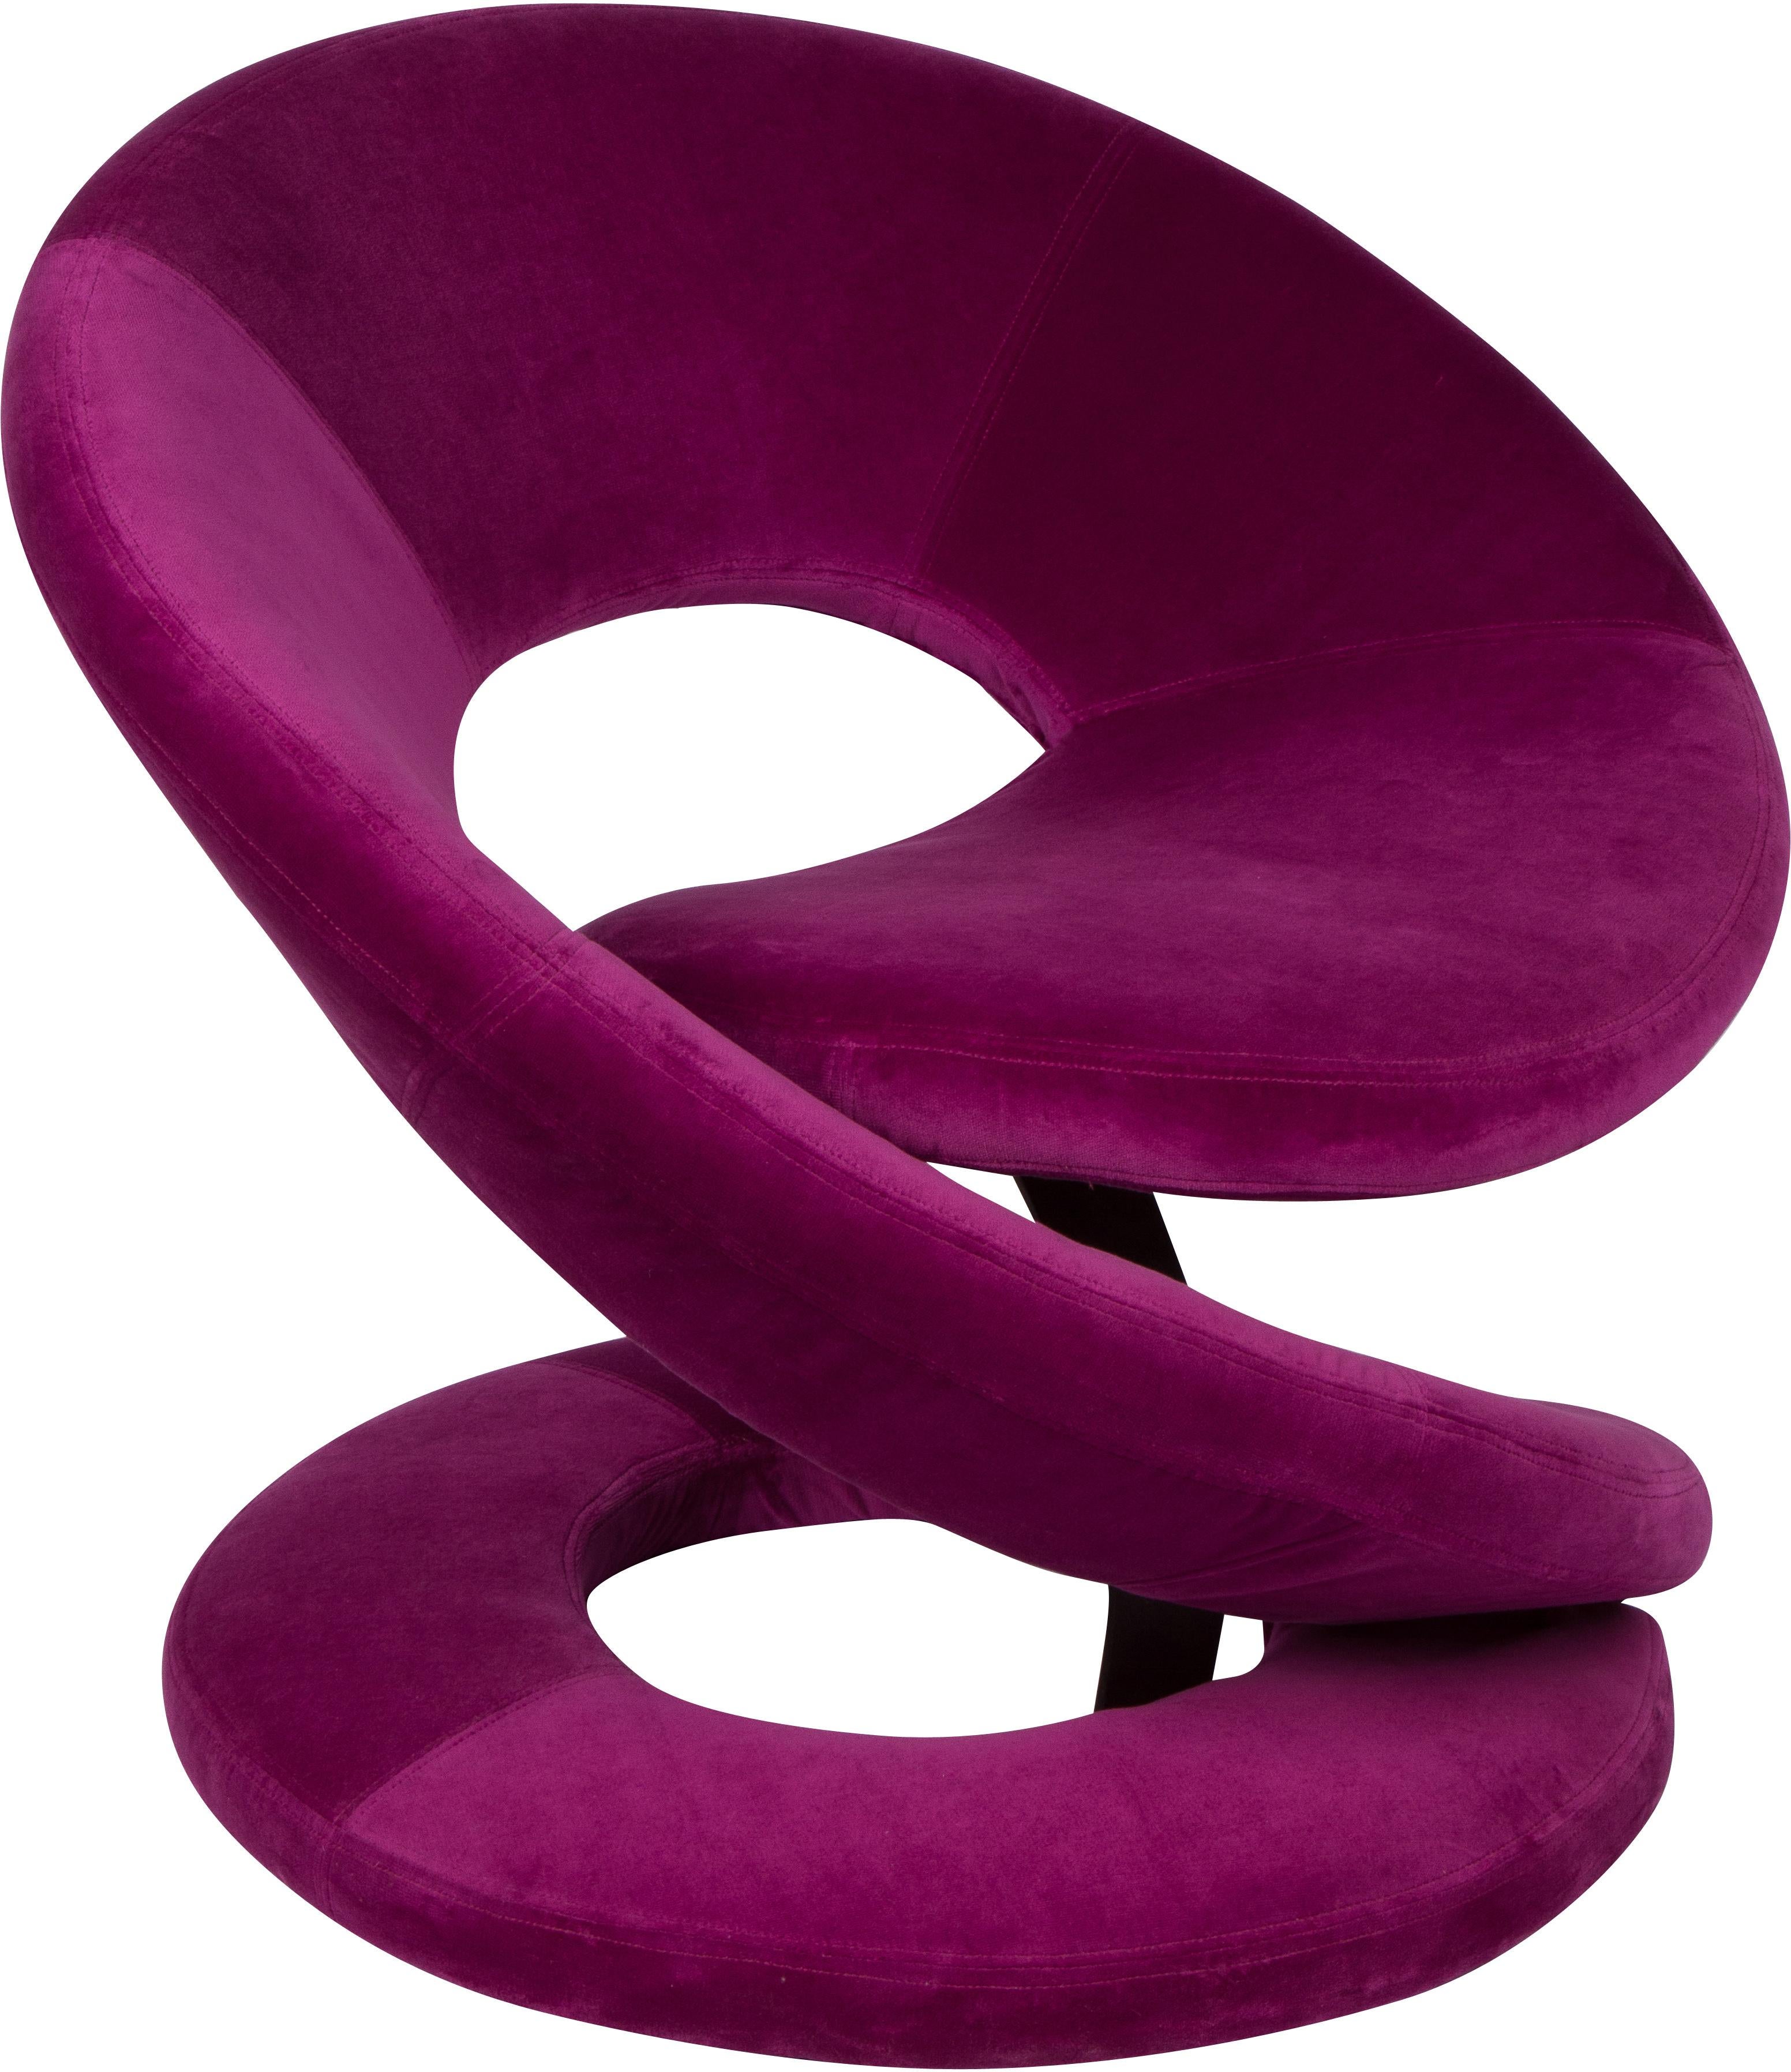 Modern Pair of 1980s Spiral Chairs